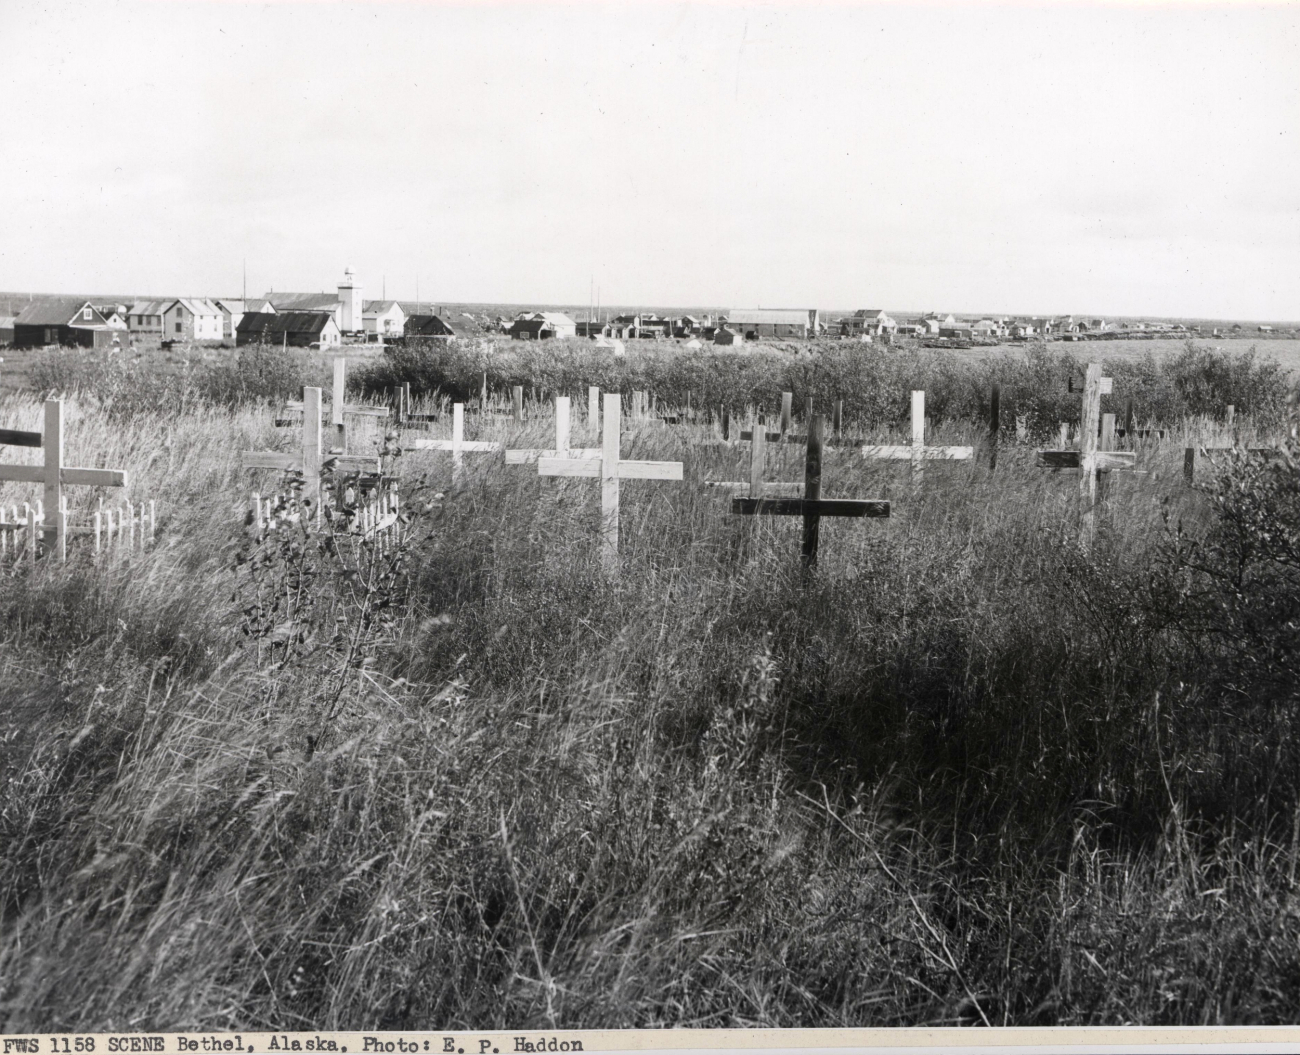 The town of Bethel seen beyond the cemetery